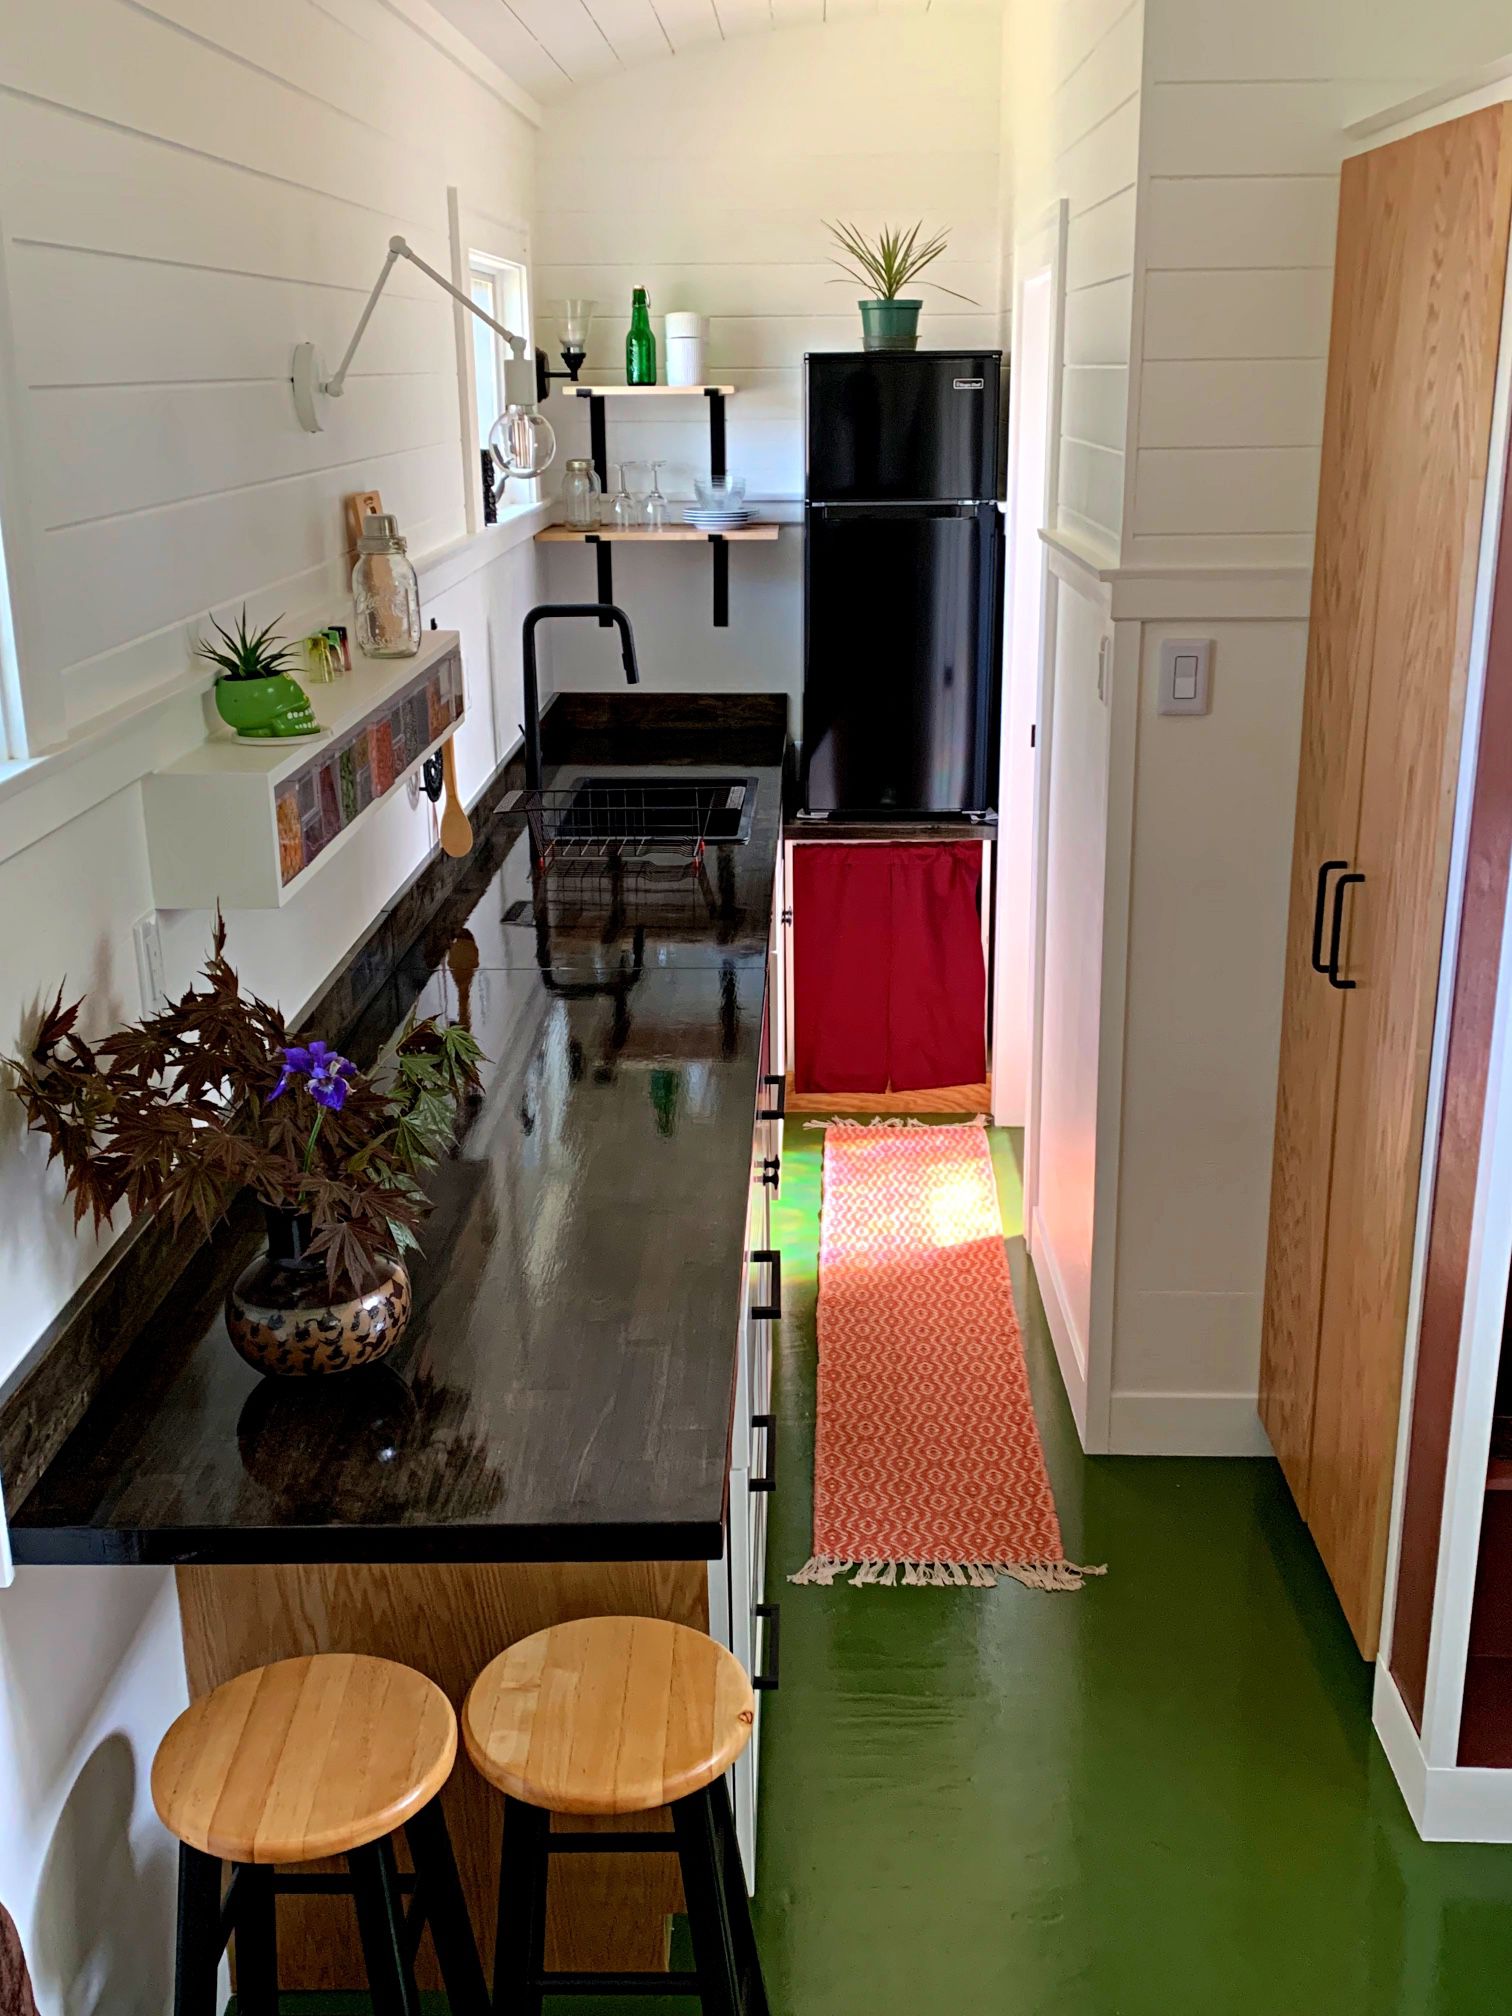 49,500  Brand NEW Tiny Home on Wheels